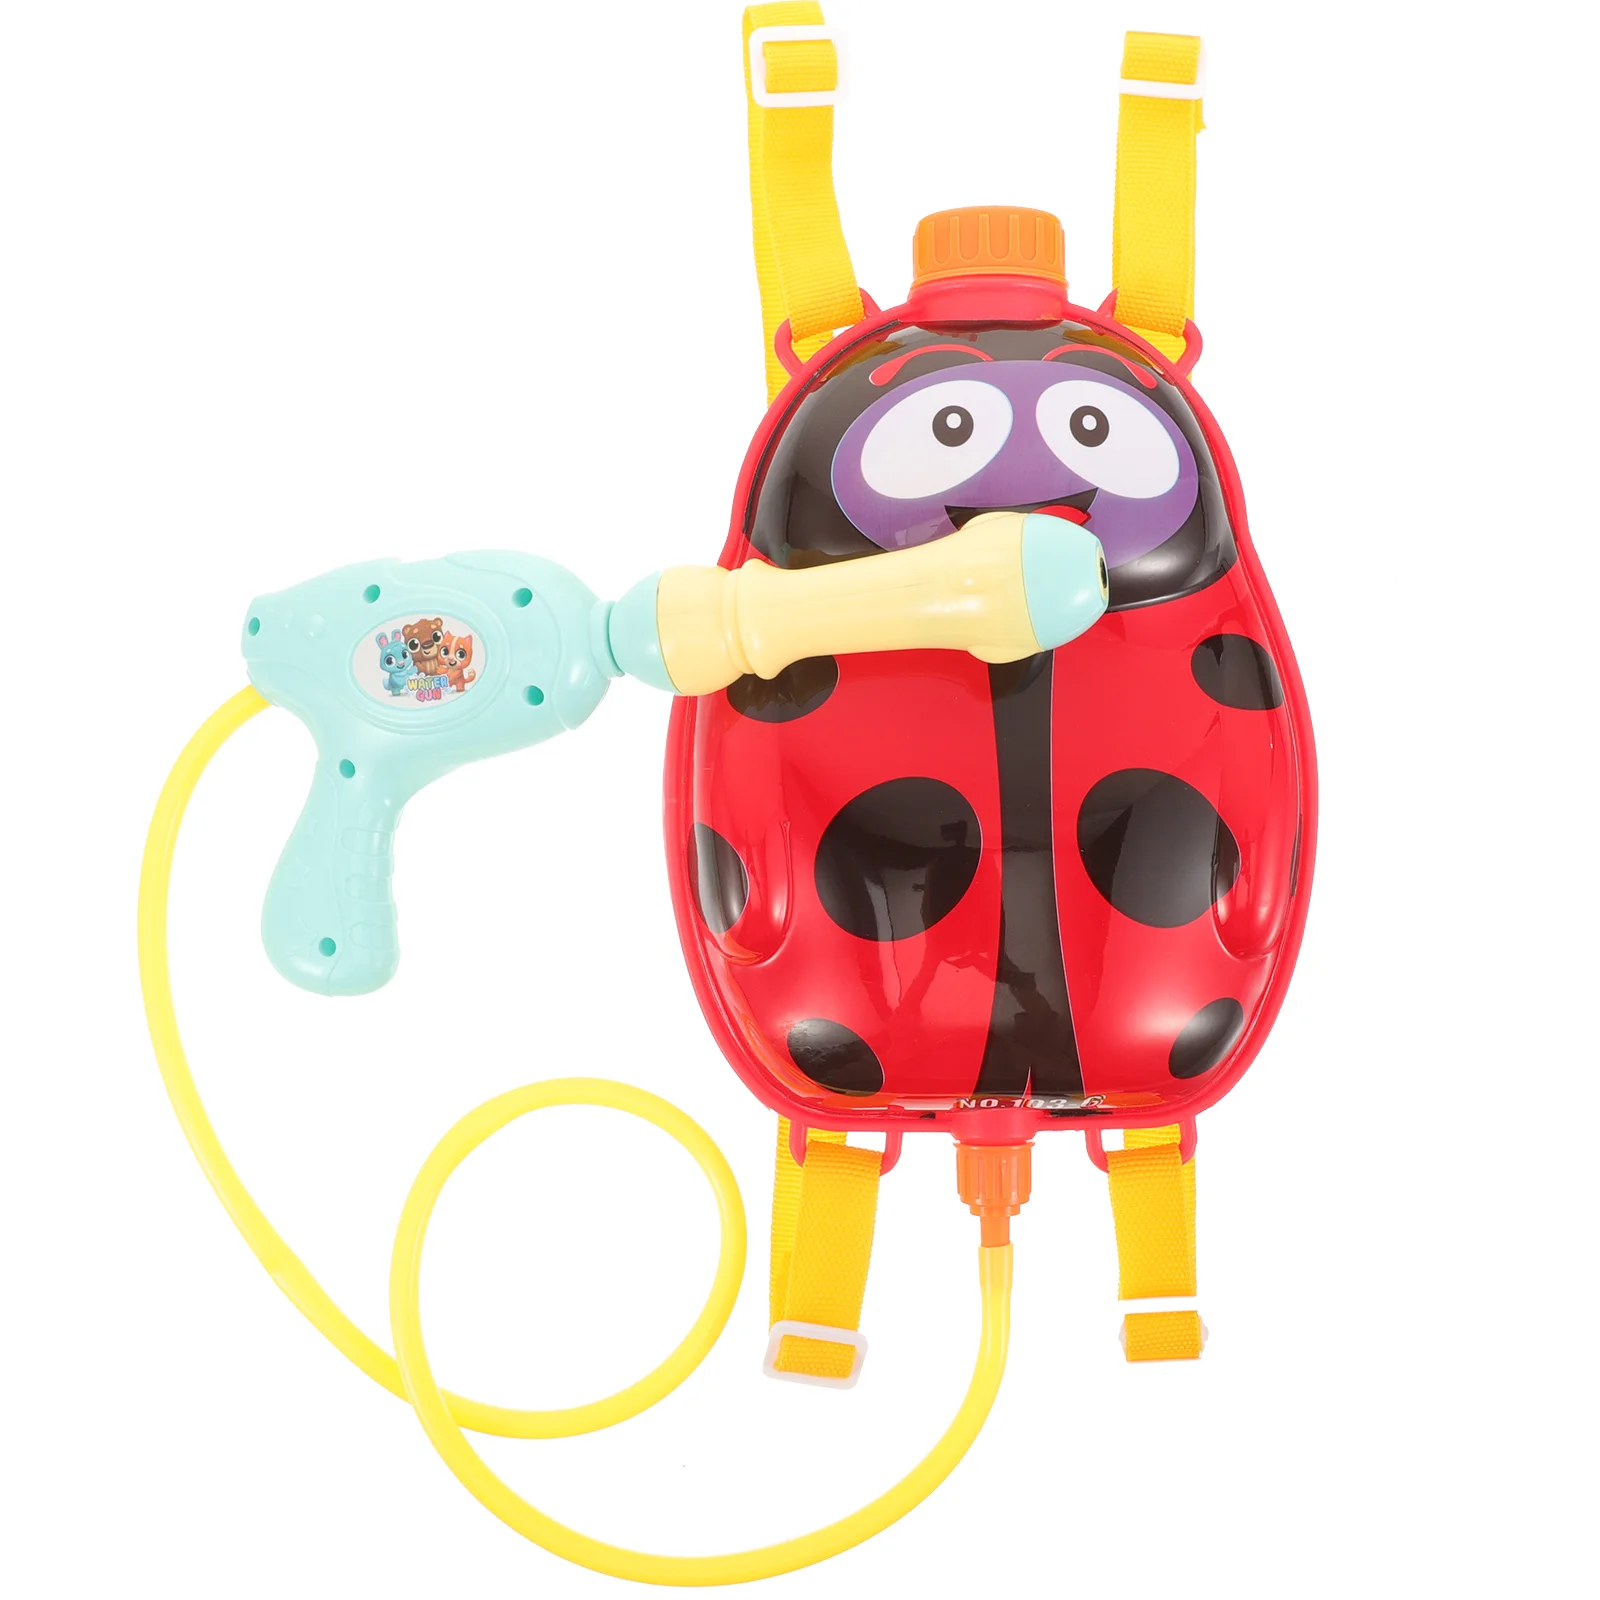 

Children's Adults Squirt Guns Toy Toy Toy Toy For Toddlers Toy Kids Party Favors Adults Guns Ladybug Backpack Squirt Fighting